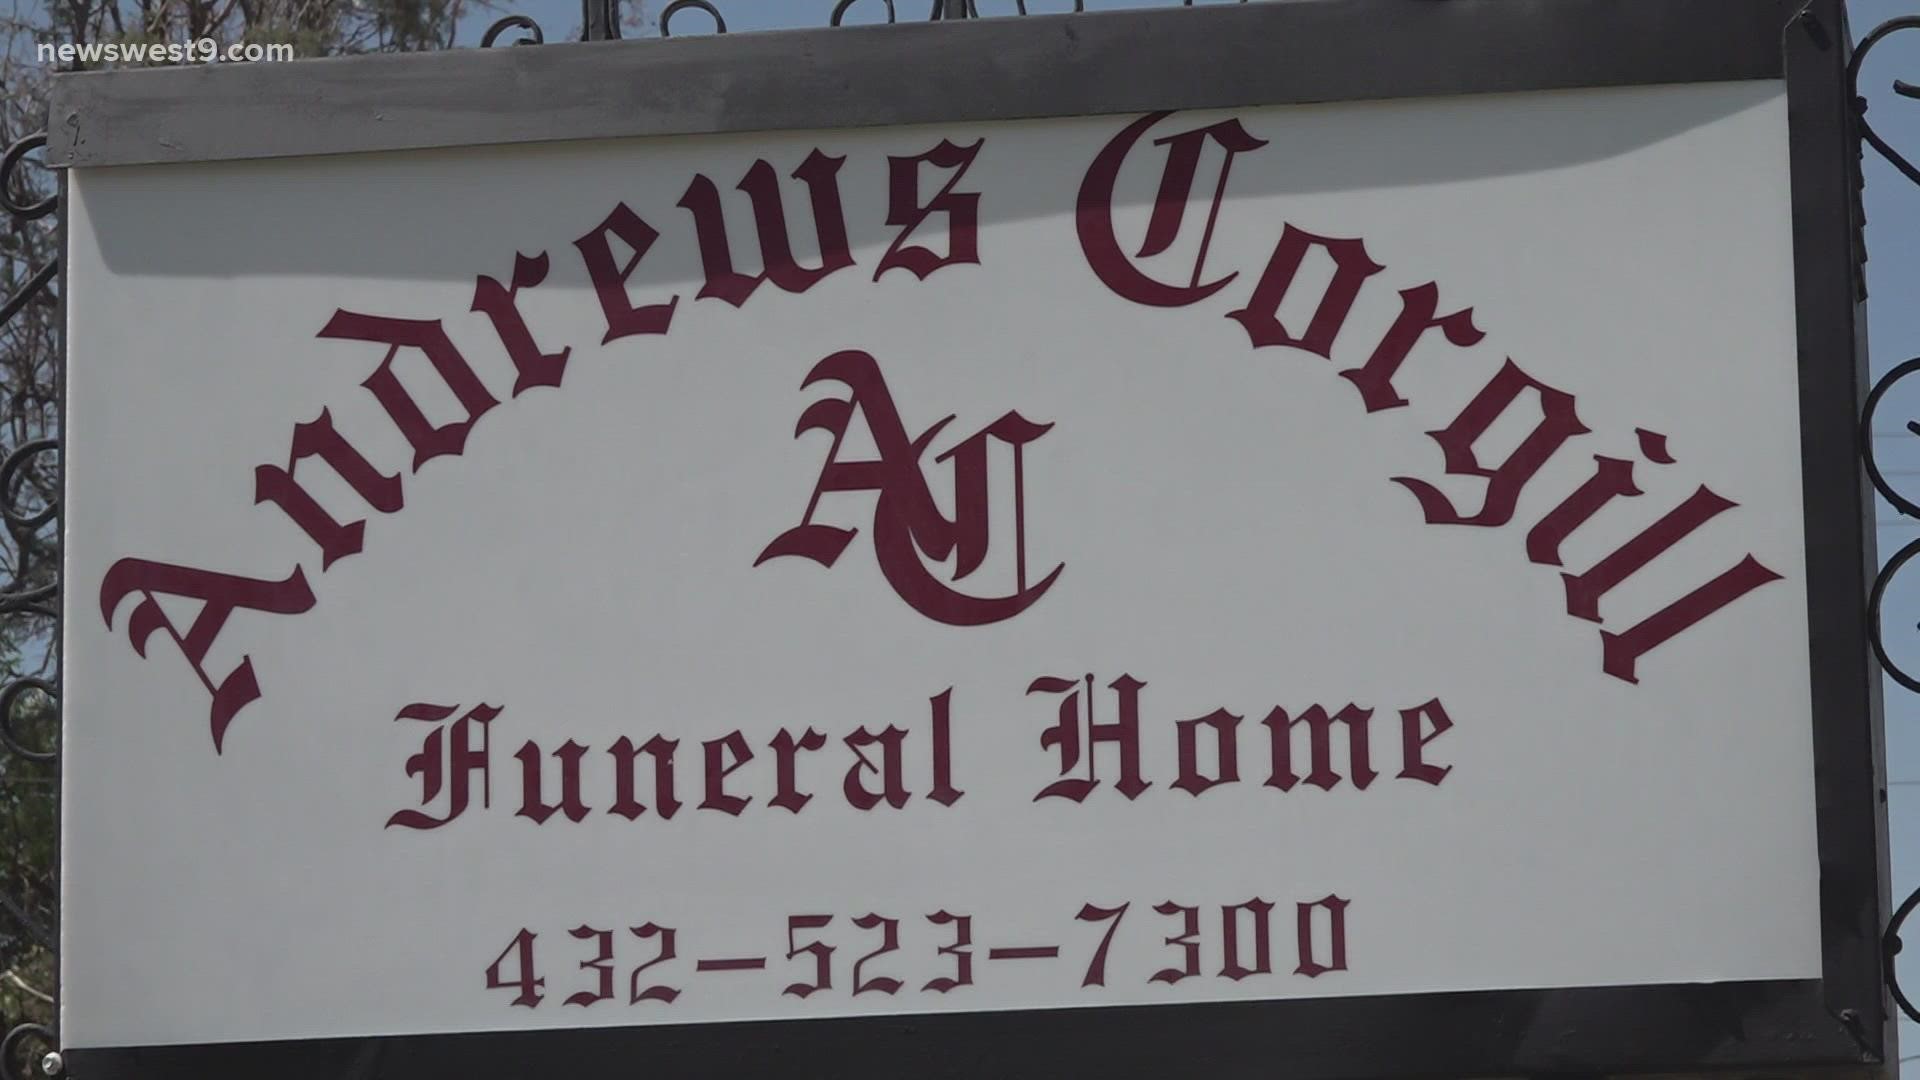 The Andrews Corgill Funeral Home will be donating register books for each of the victim's families.